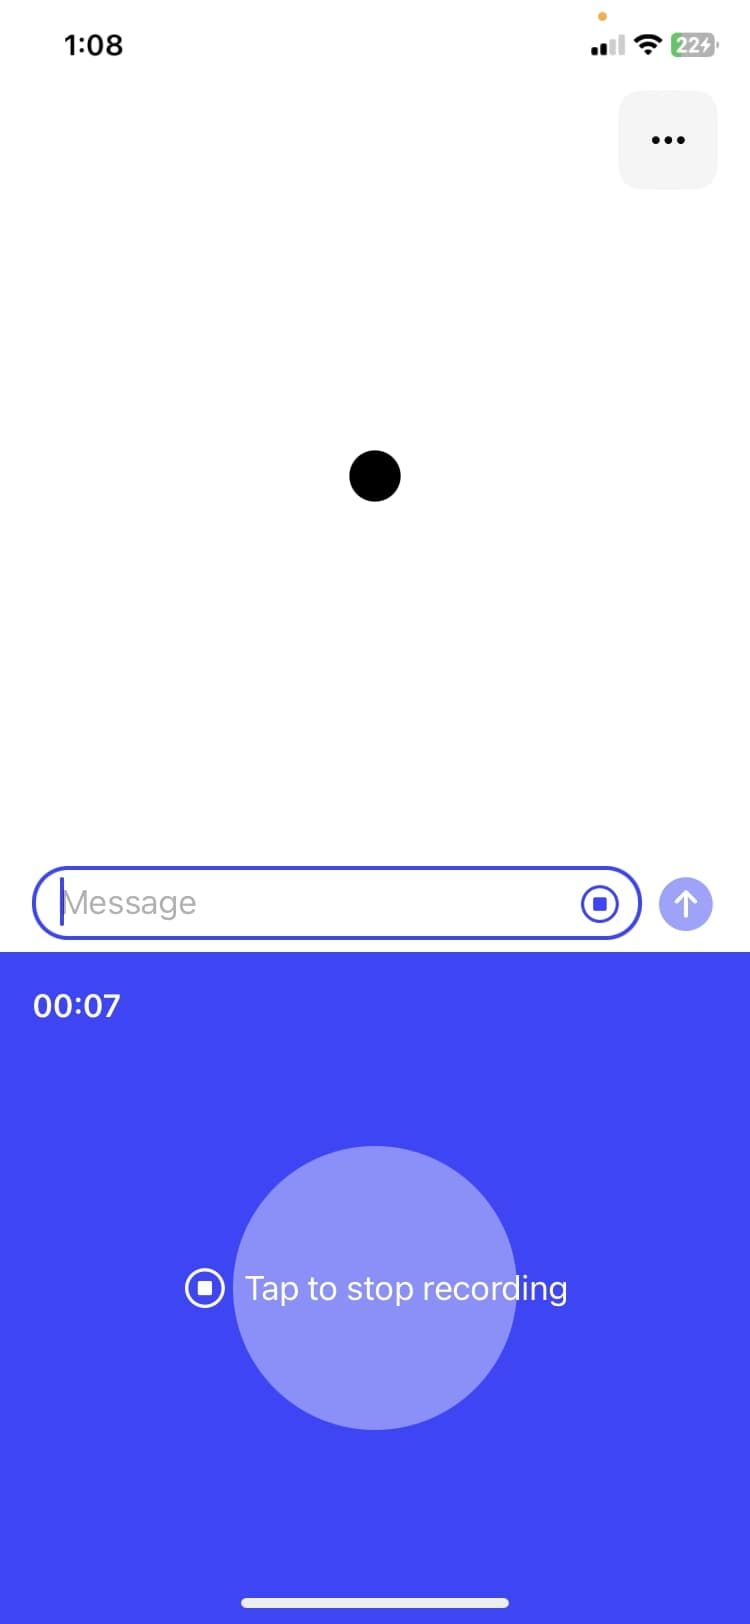 tap to stop recording on chatGPT iOS app